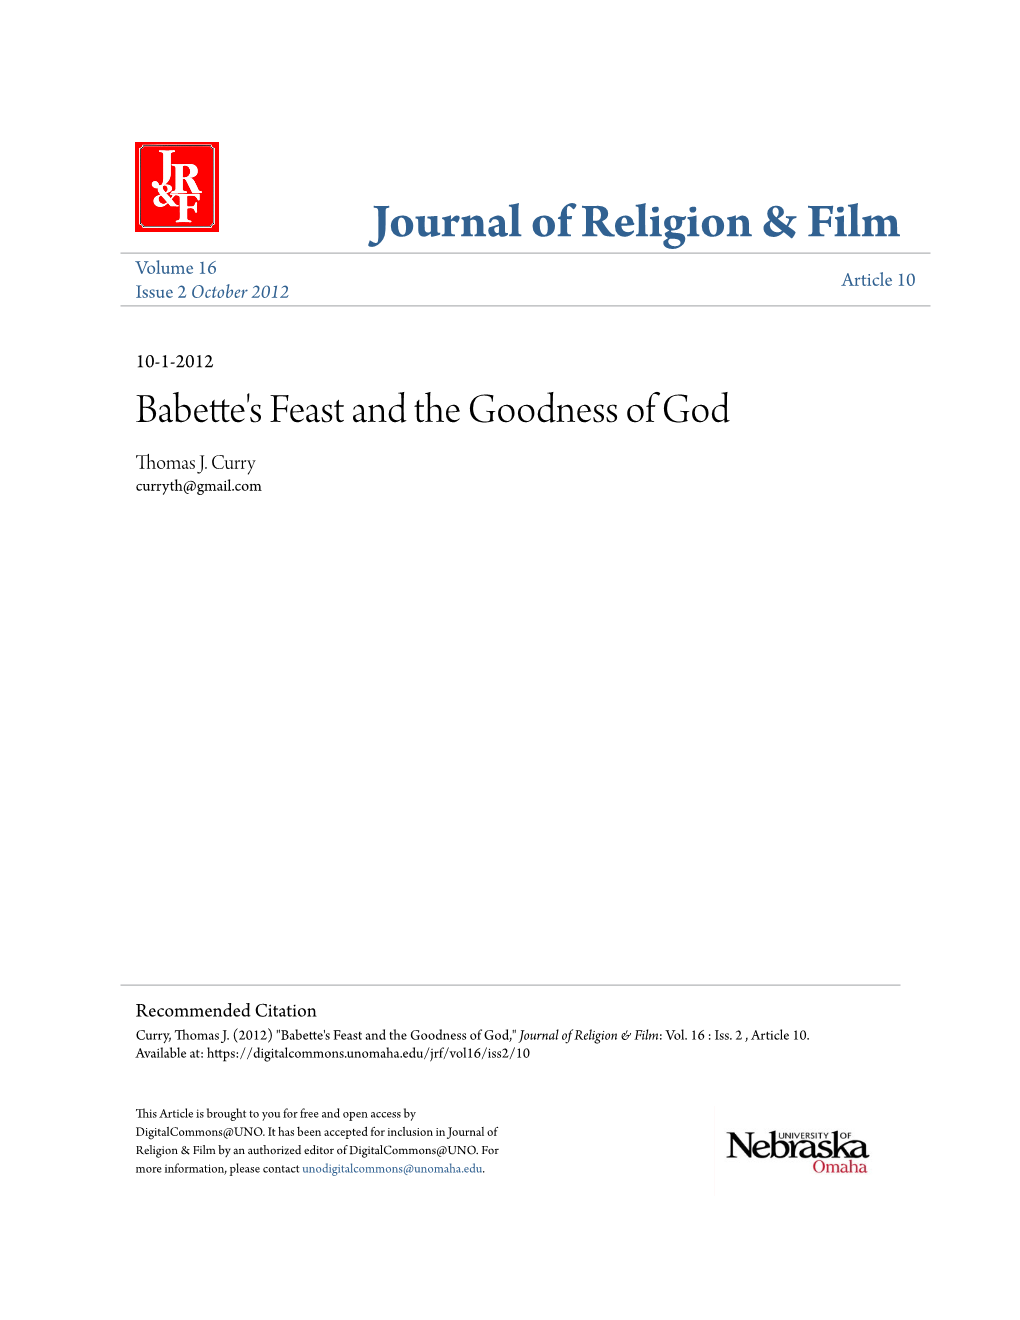 Babette's Feast and the Goodness of God Thomas J